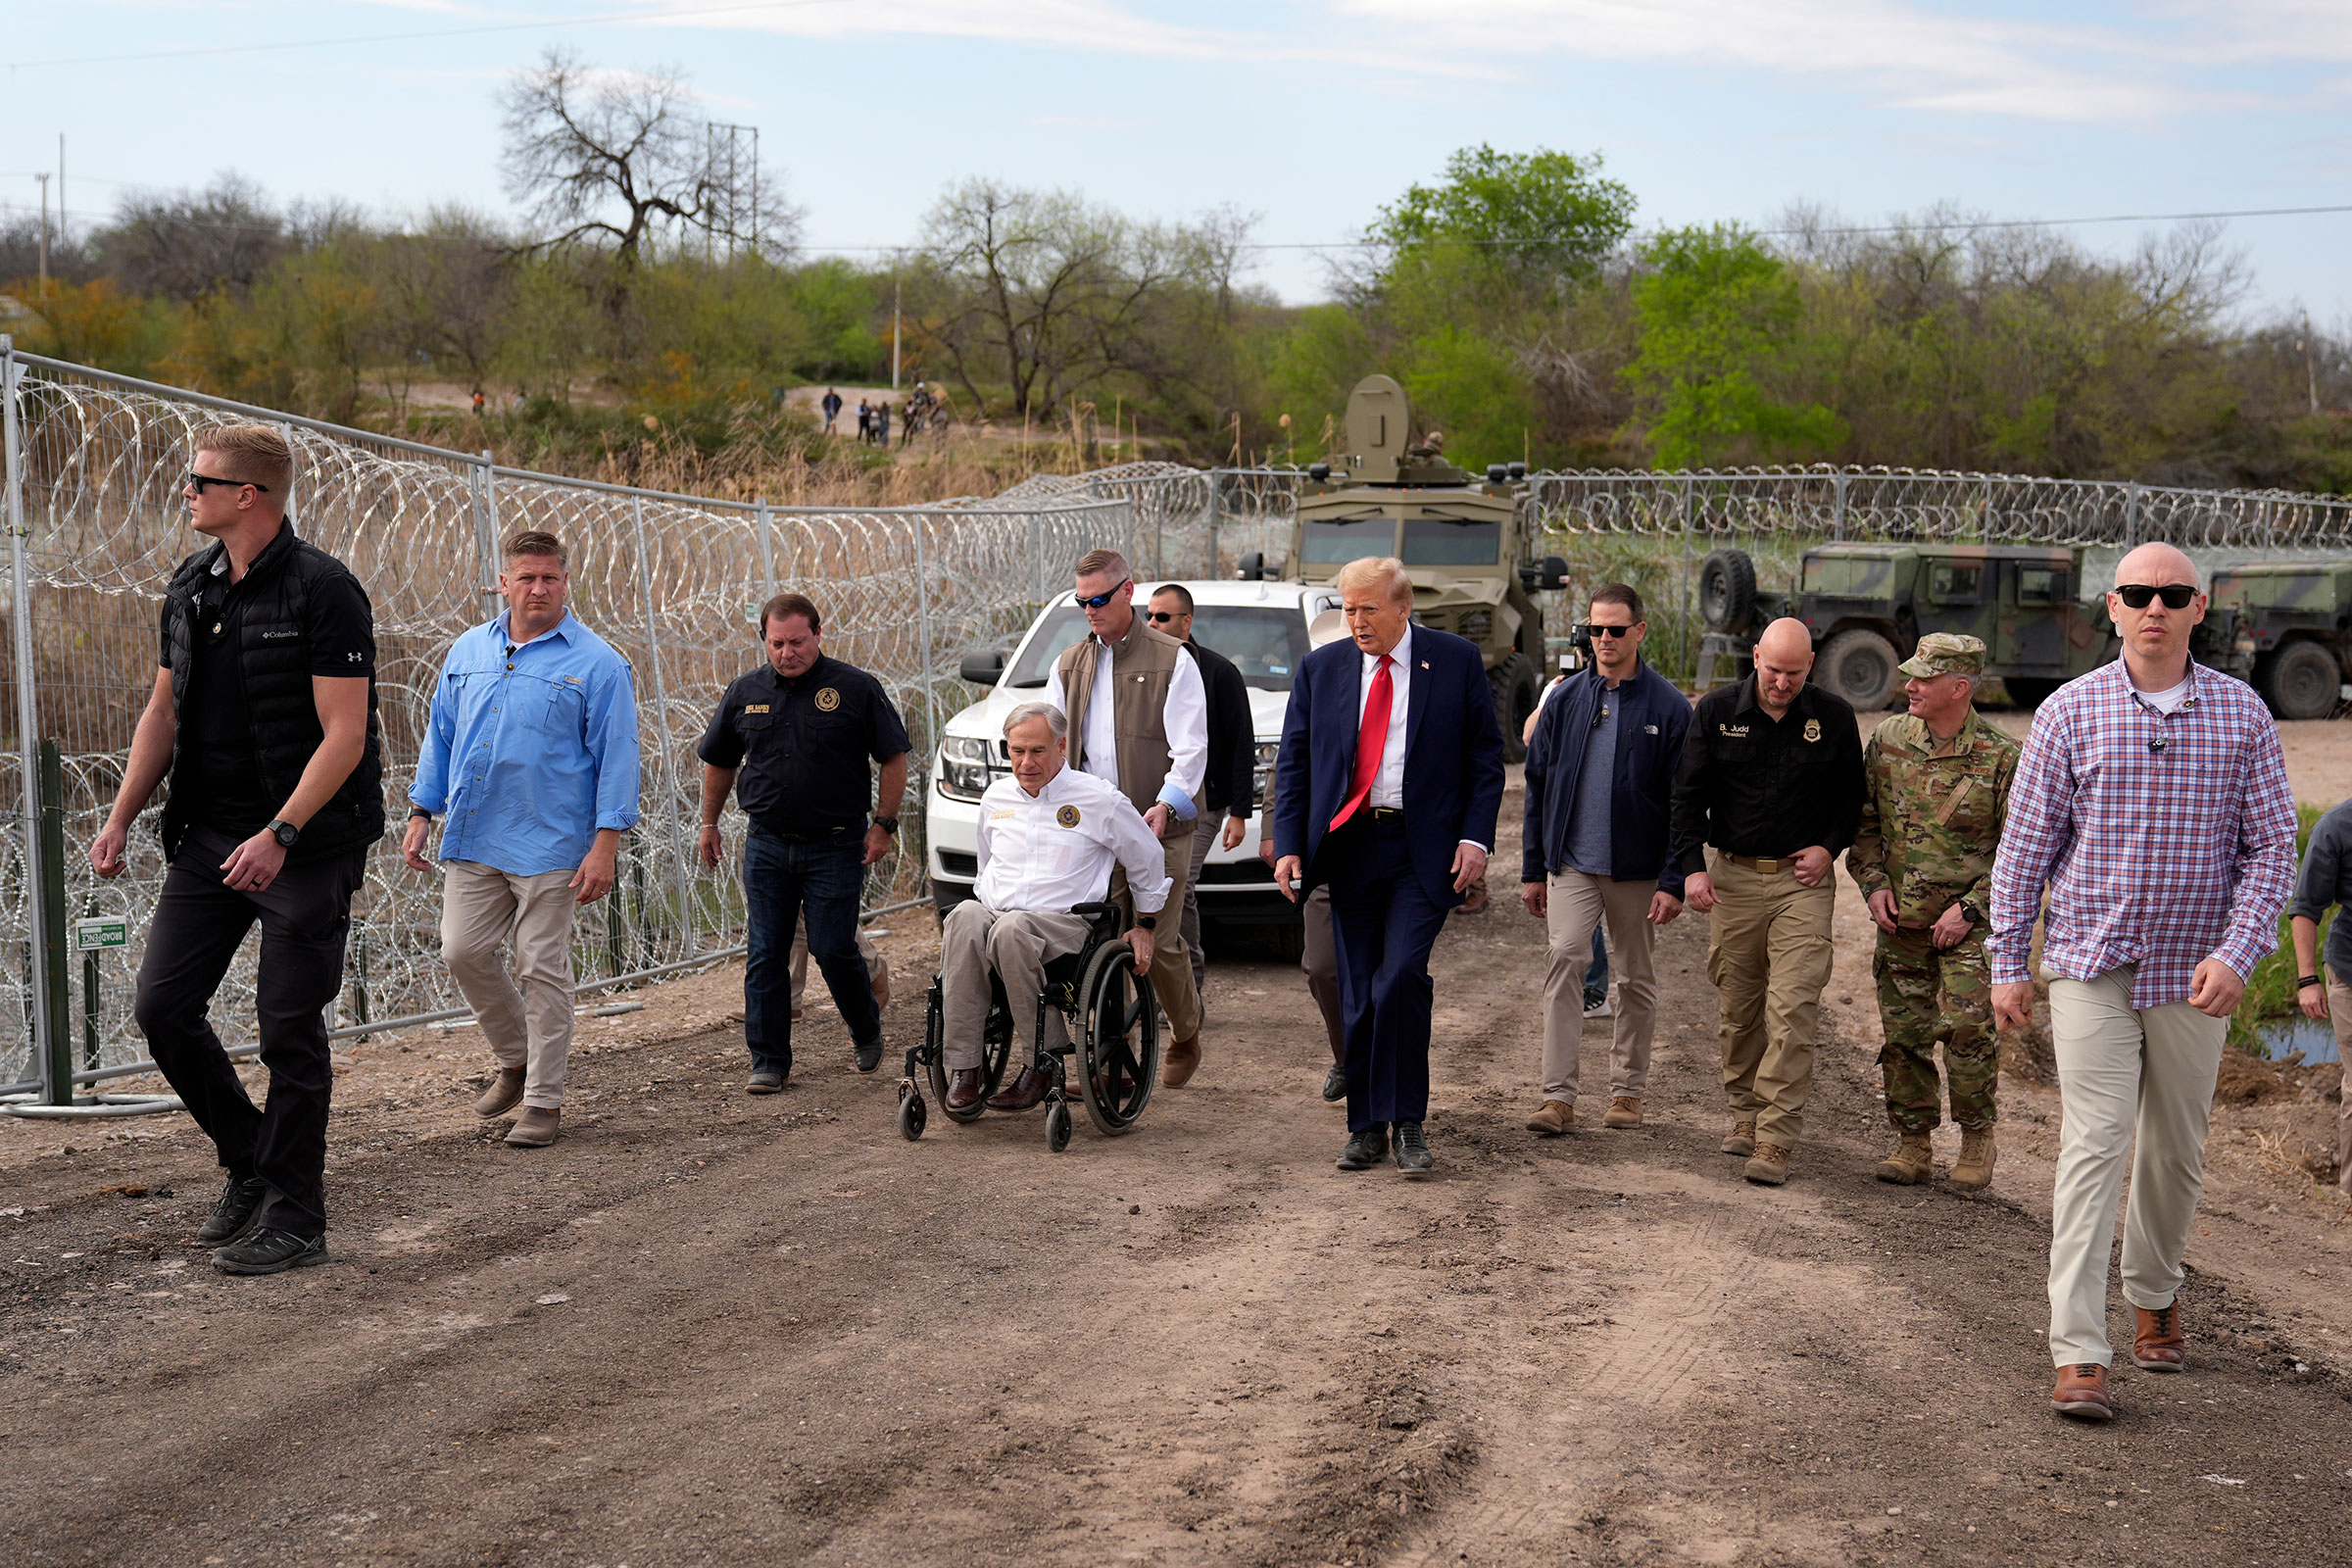 Former President Donald Trump walks at Shelby Park during a visit to the US-Mexico border on Thursday in Eagle Pass, Texas.